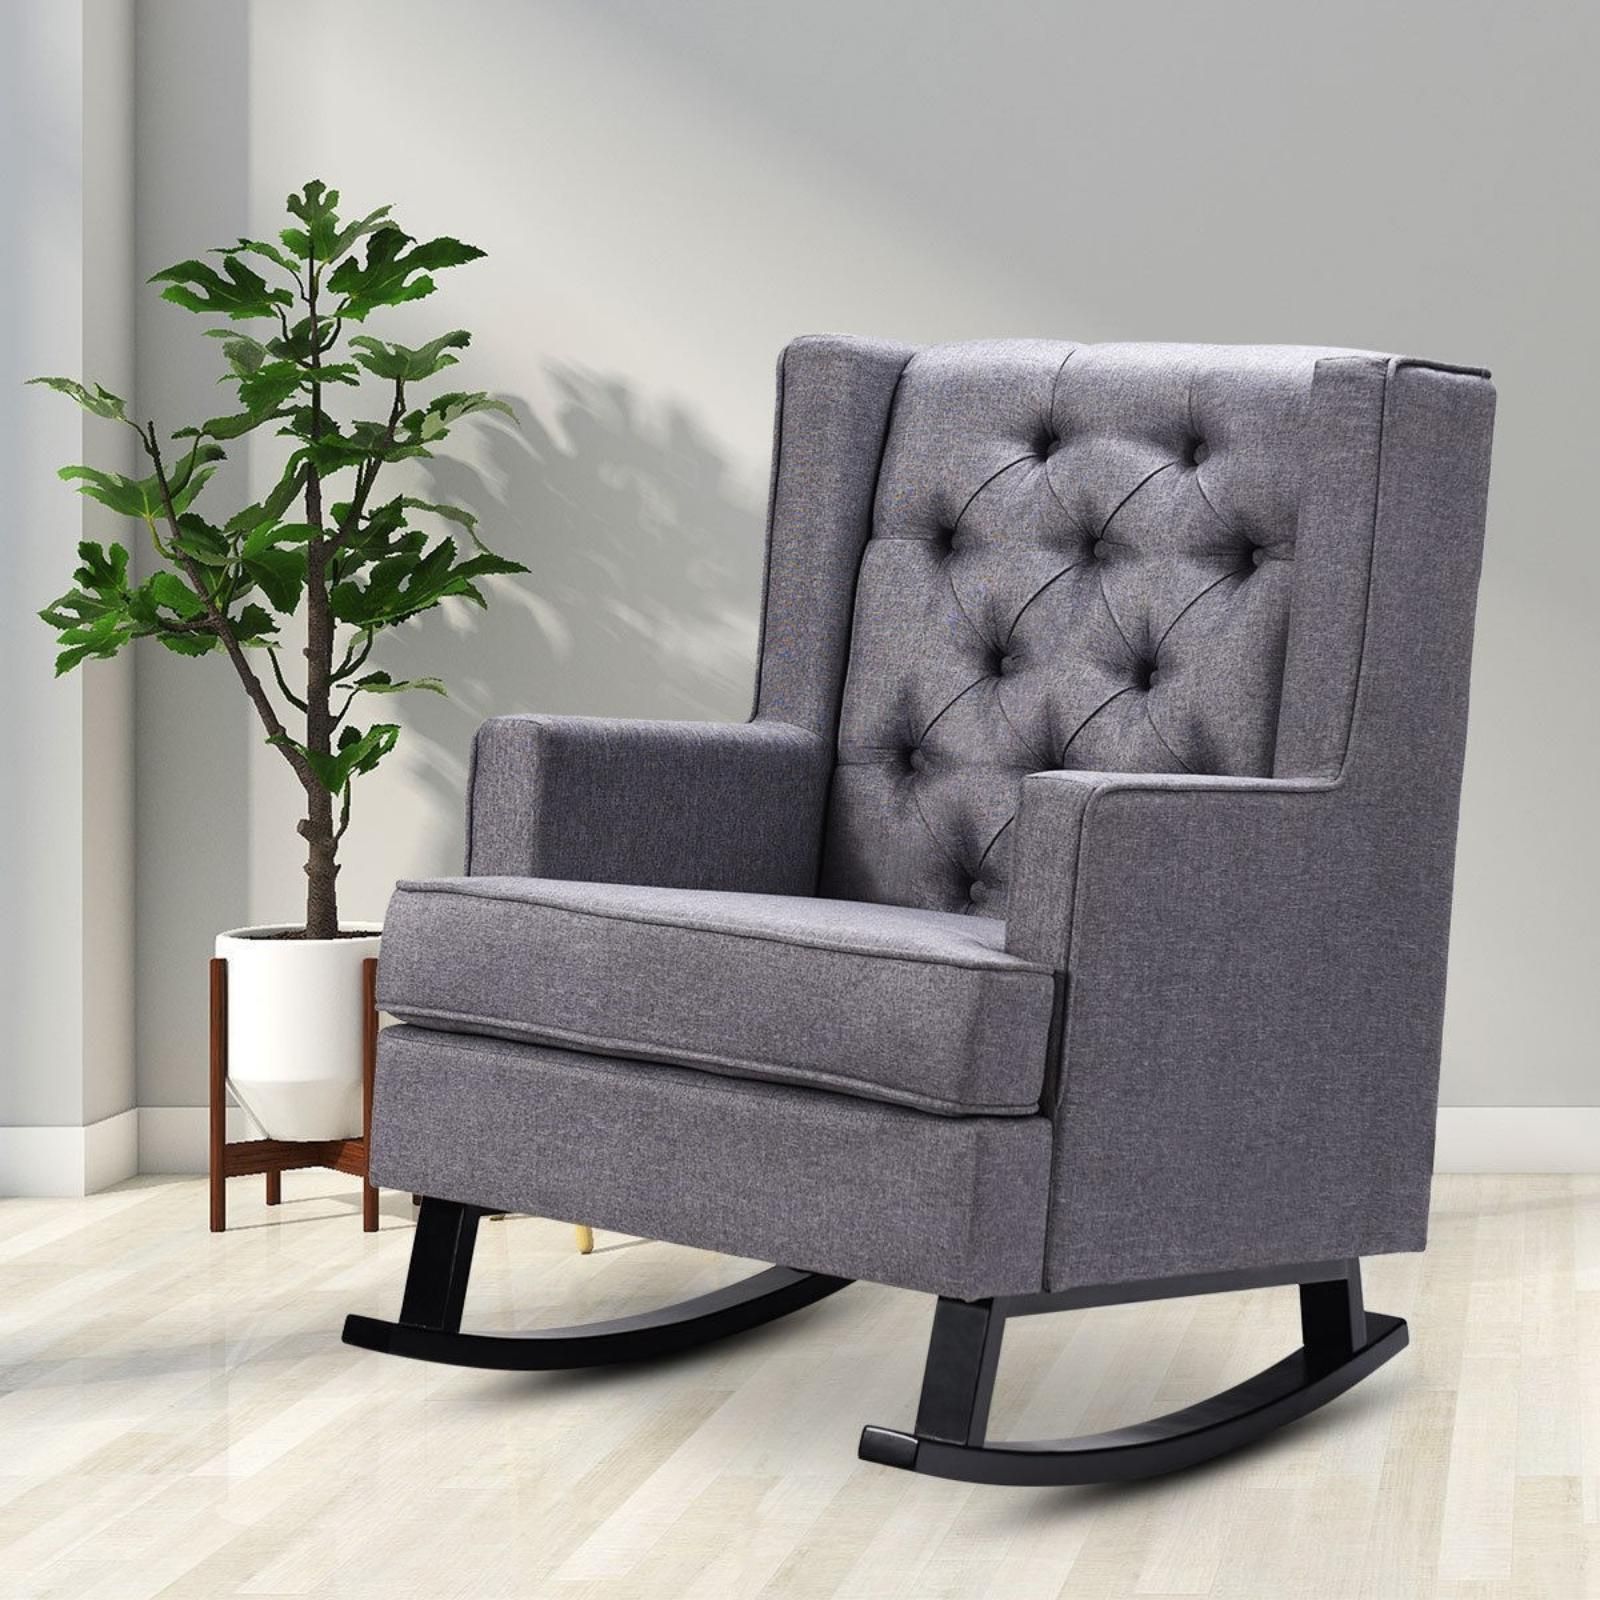 Newest Modern Rocking Chair Recliner Dark Grey Cushioned Fabric Intended For Dark Wood Outdoor Reclining Chairs (View 8 of 15)